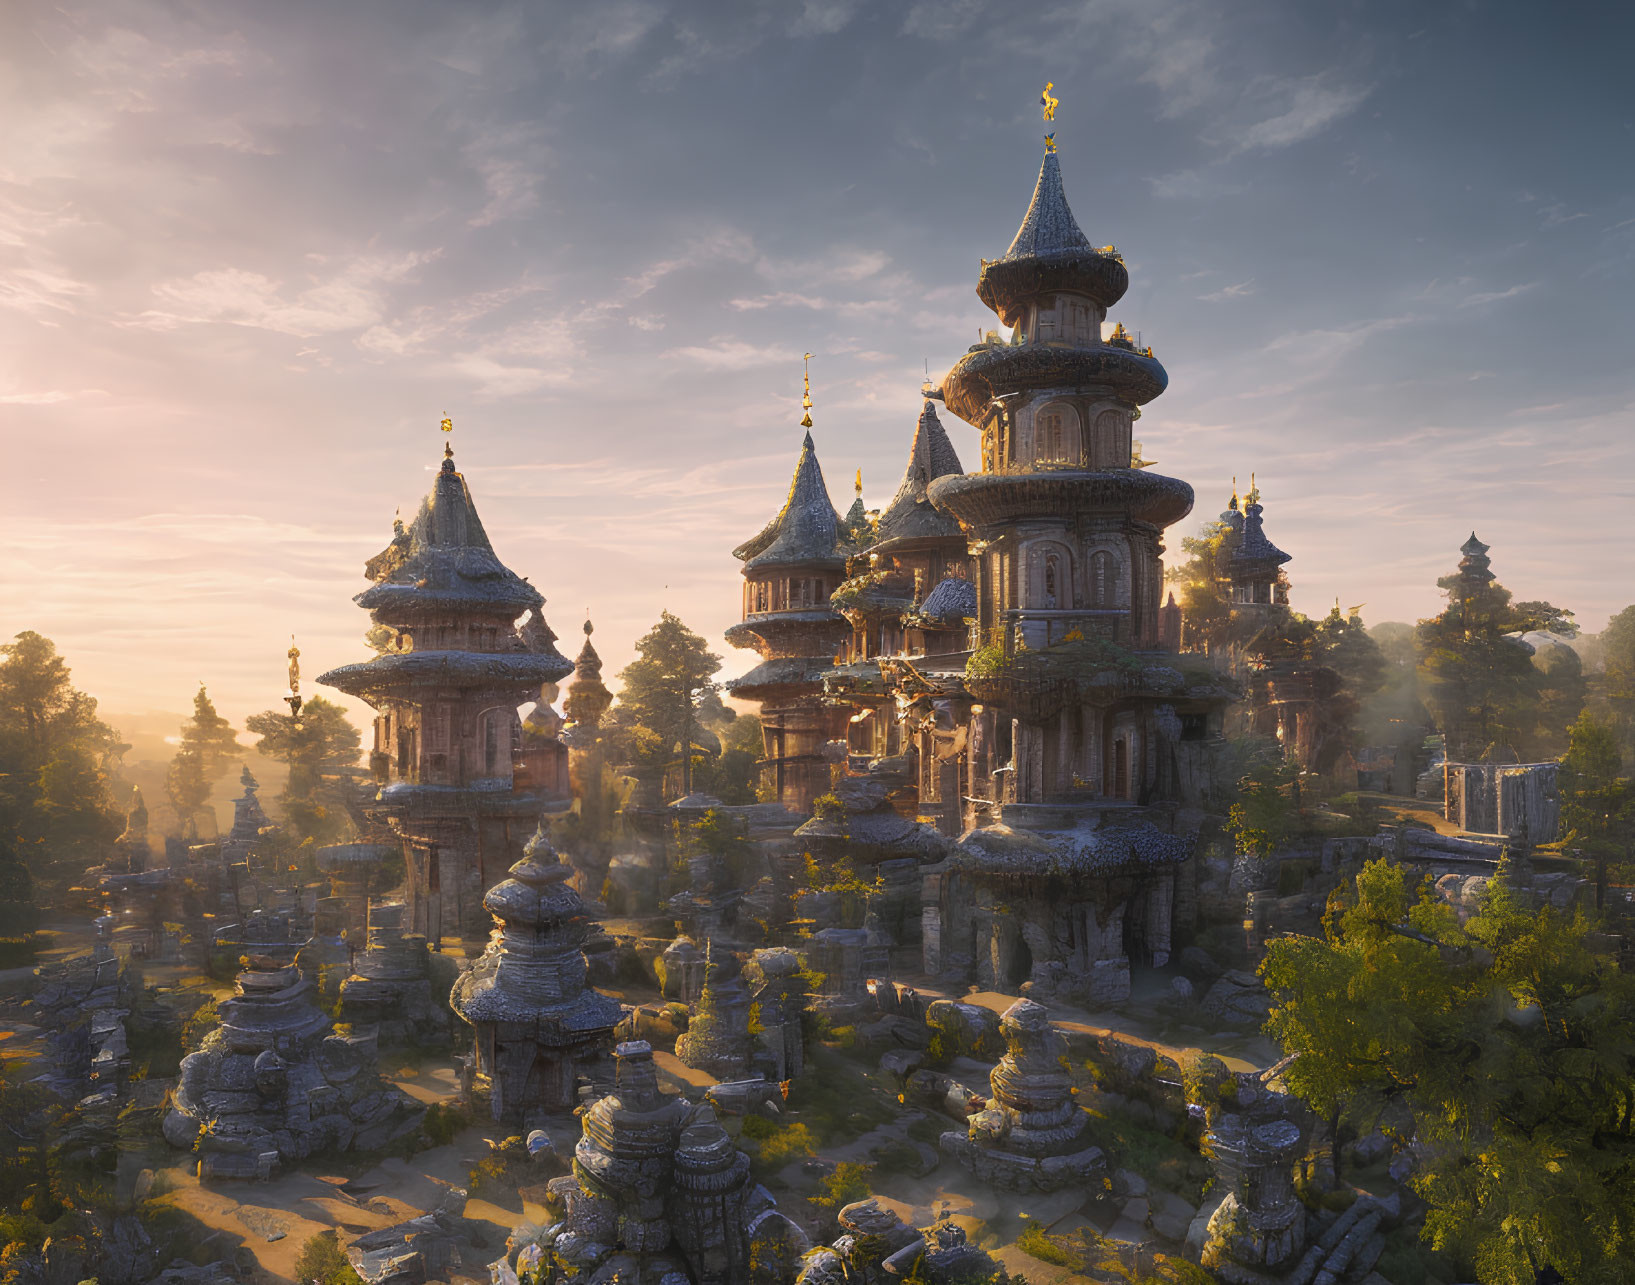 Ancient City at Sunrise with Ornate Towers and Rock Formations